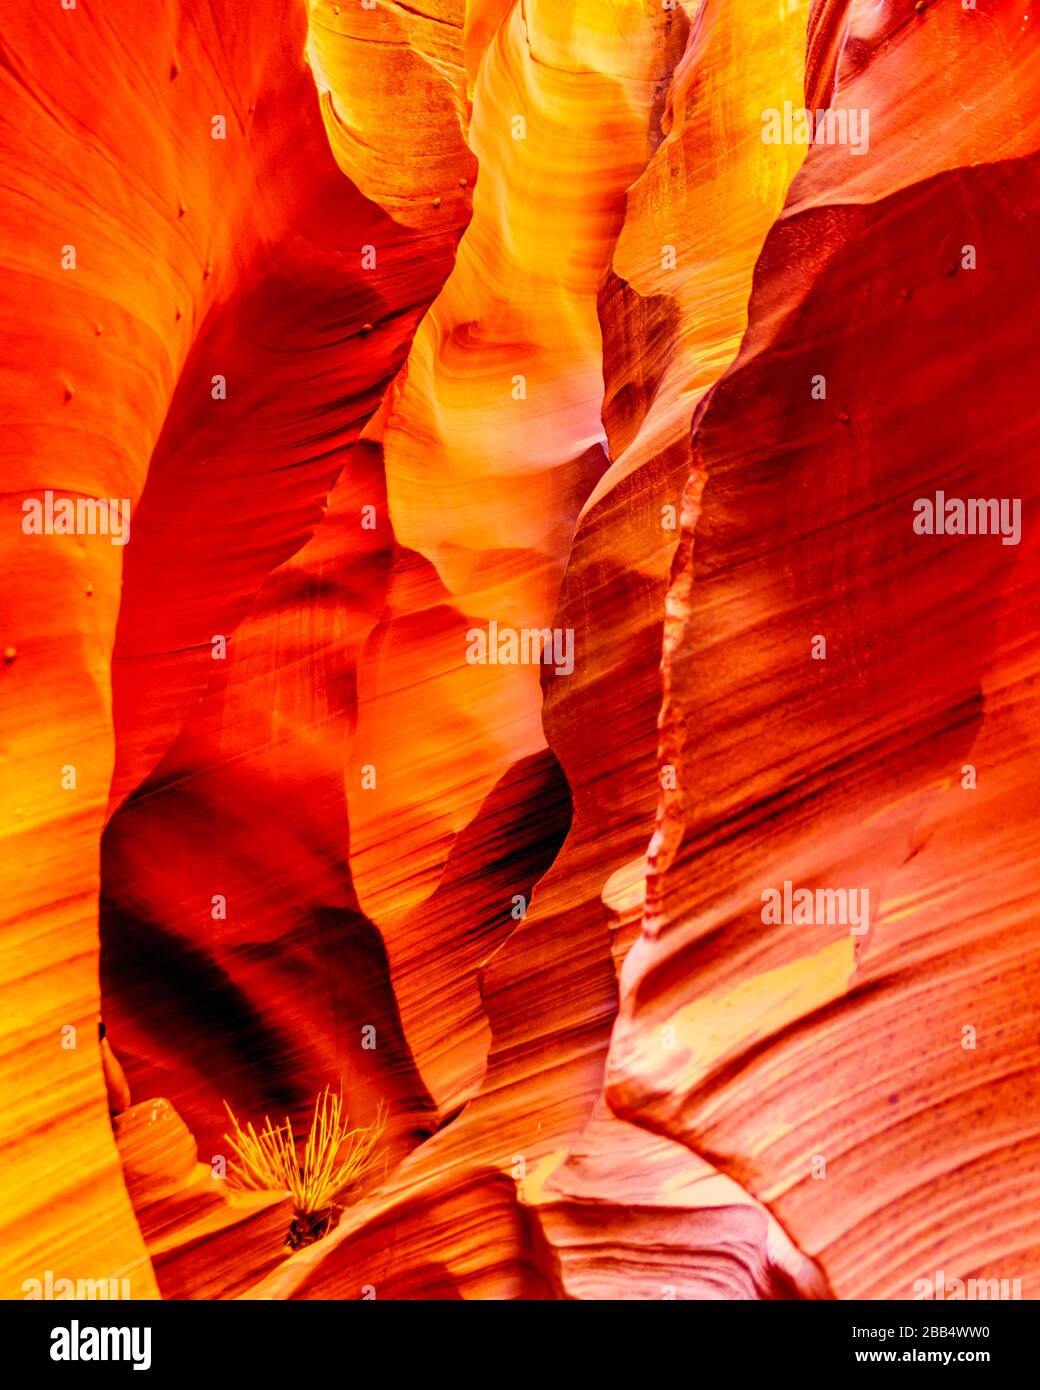 The smooth curved Red Navajo Sandstone walls of Rattlesnake Canyon, one of the famous Slot Canyons in the Navajo lands near Page Arizona, USA Stock Photo